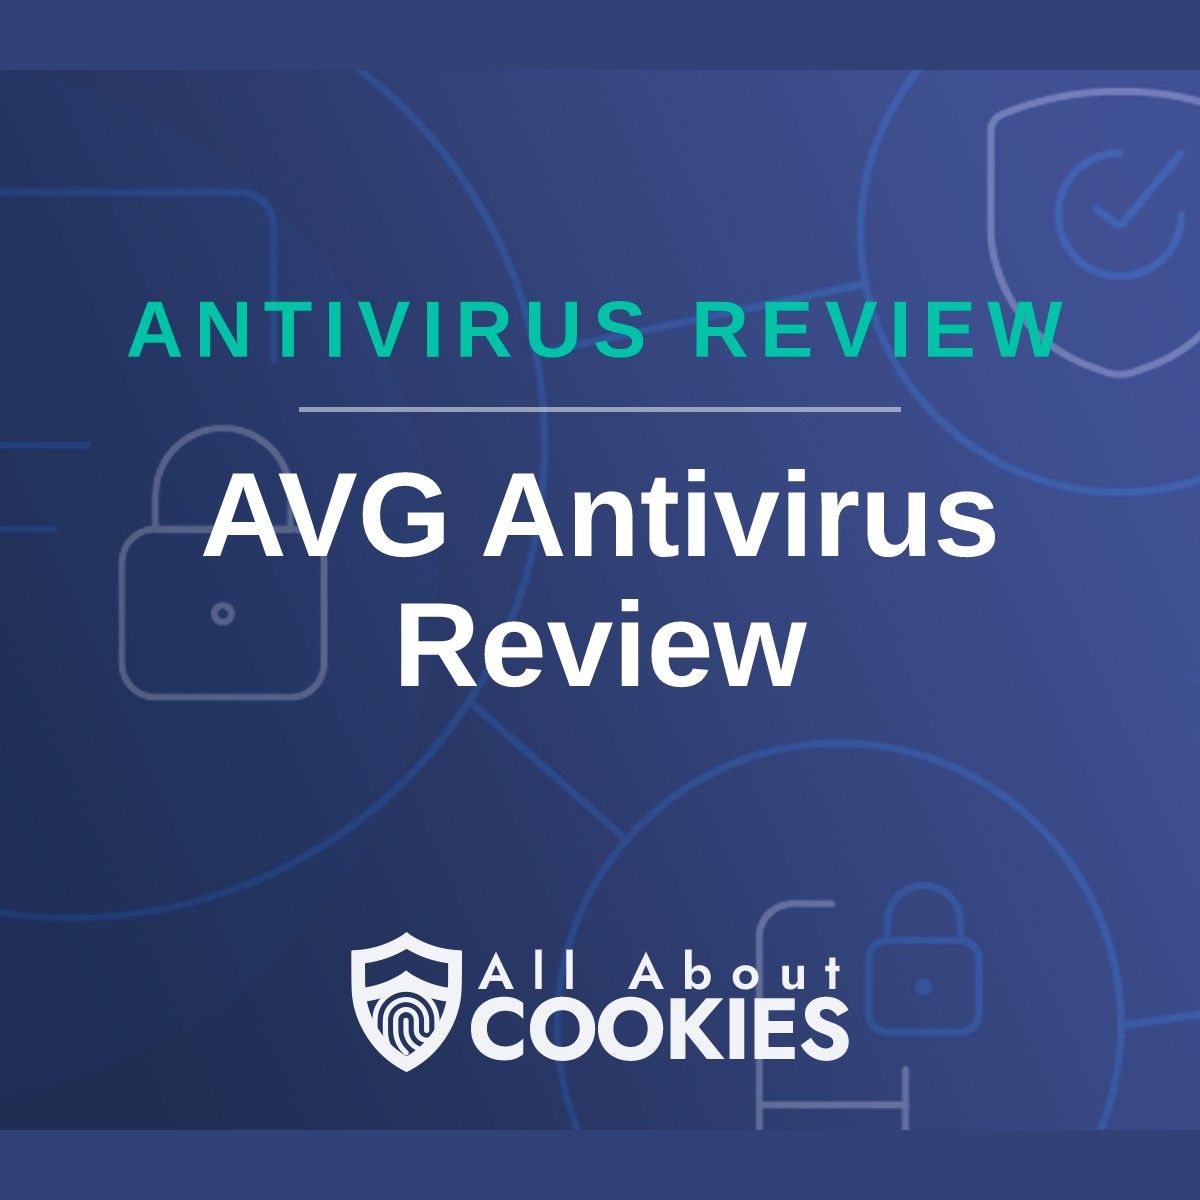 A blue background with images of locks and shields with the text "AVG Antivirus Review" and the All About Cookies logo. 